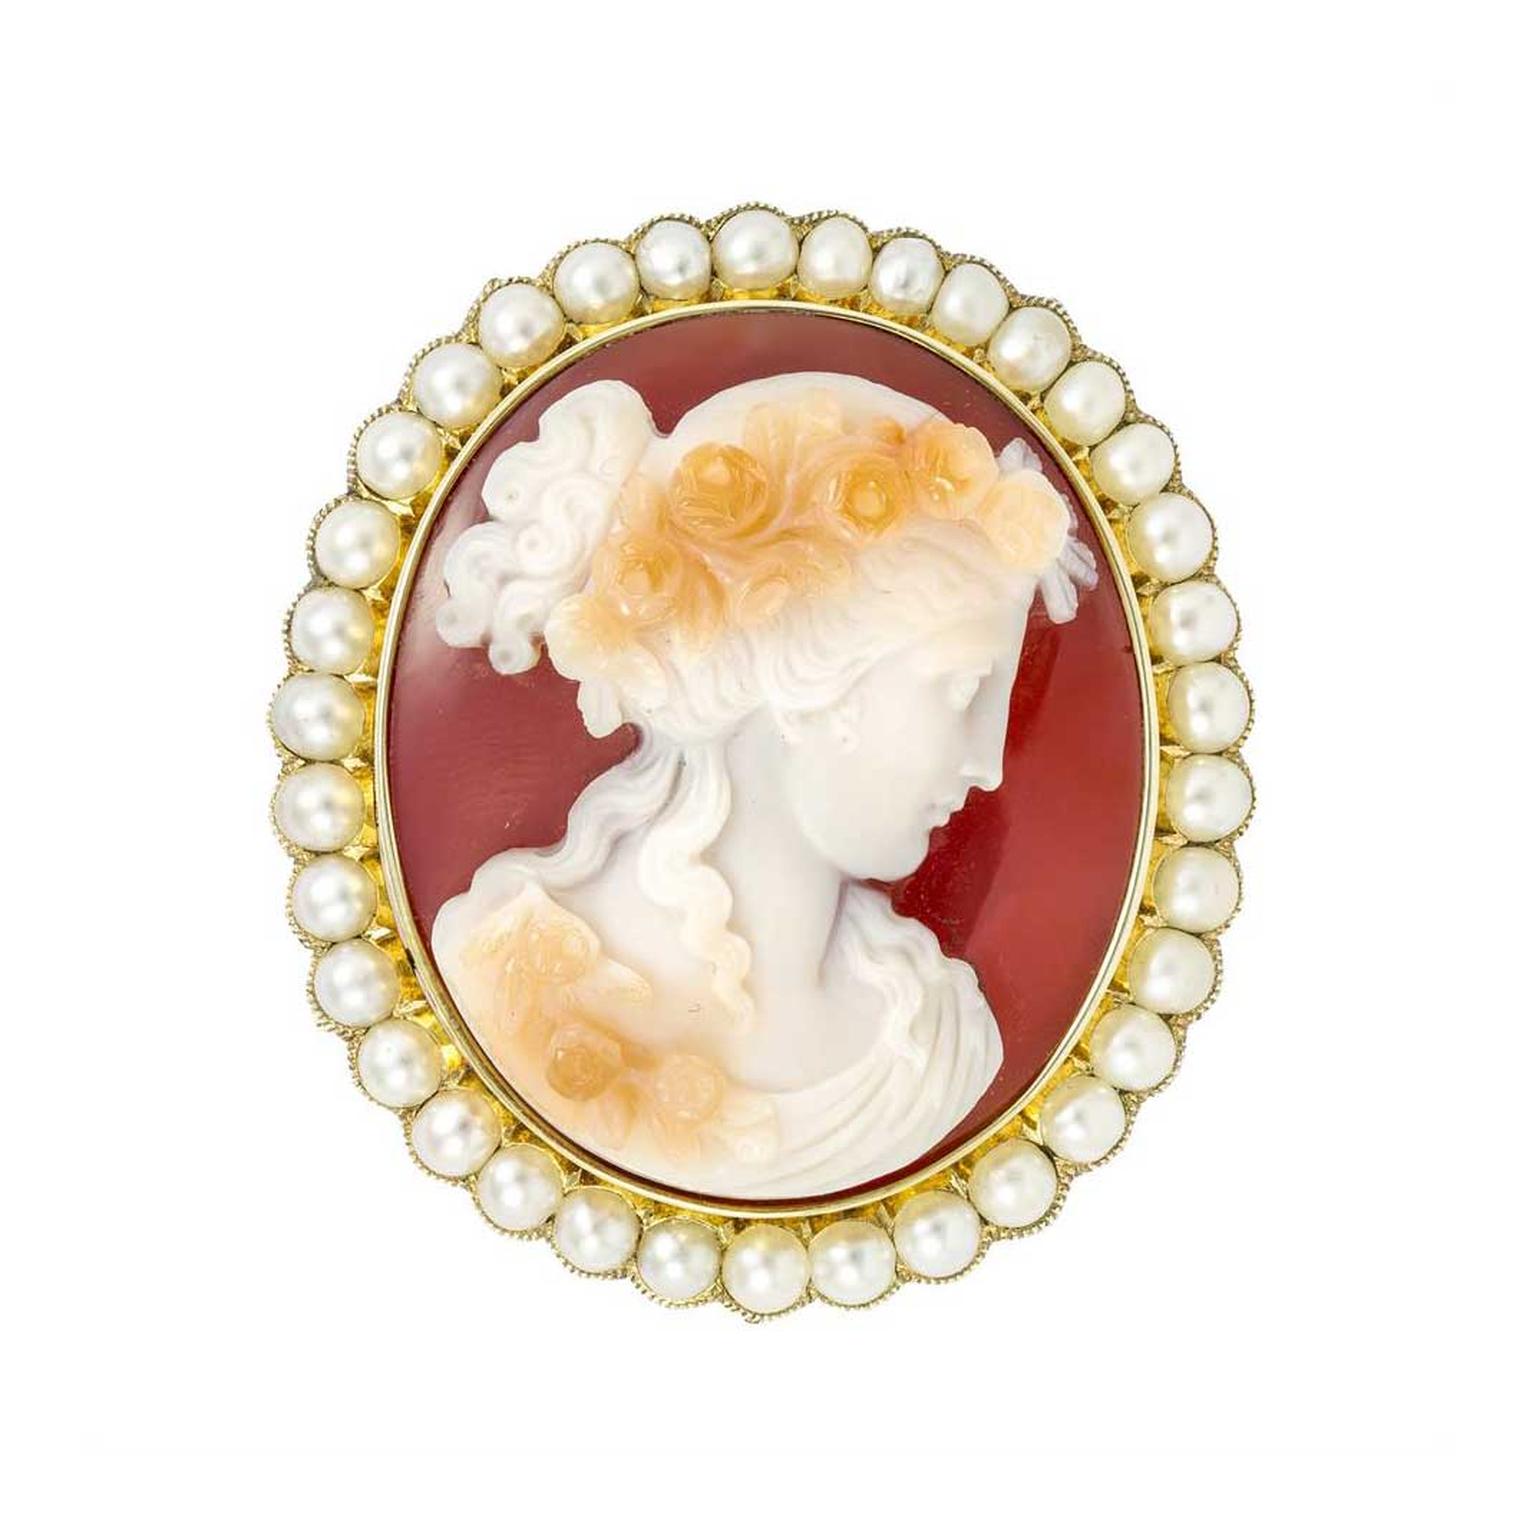 Cameo Brooch, Victorian Lady Brooch for Women Vintage, Pearl Brooch Pins  for Women Fashion, Ancient Silver Brooch Antique Royal Luxury Jewelry black